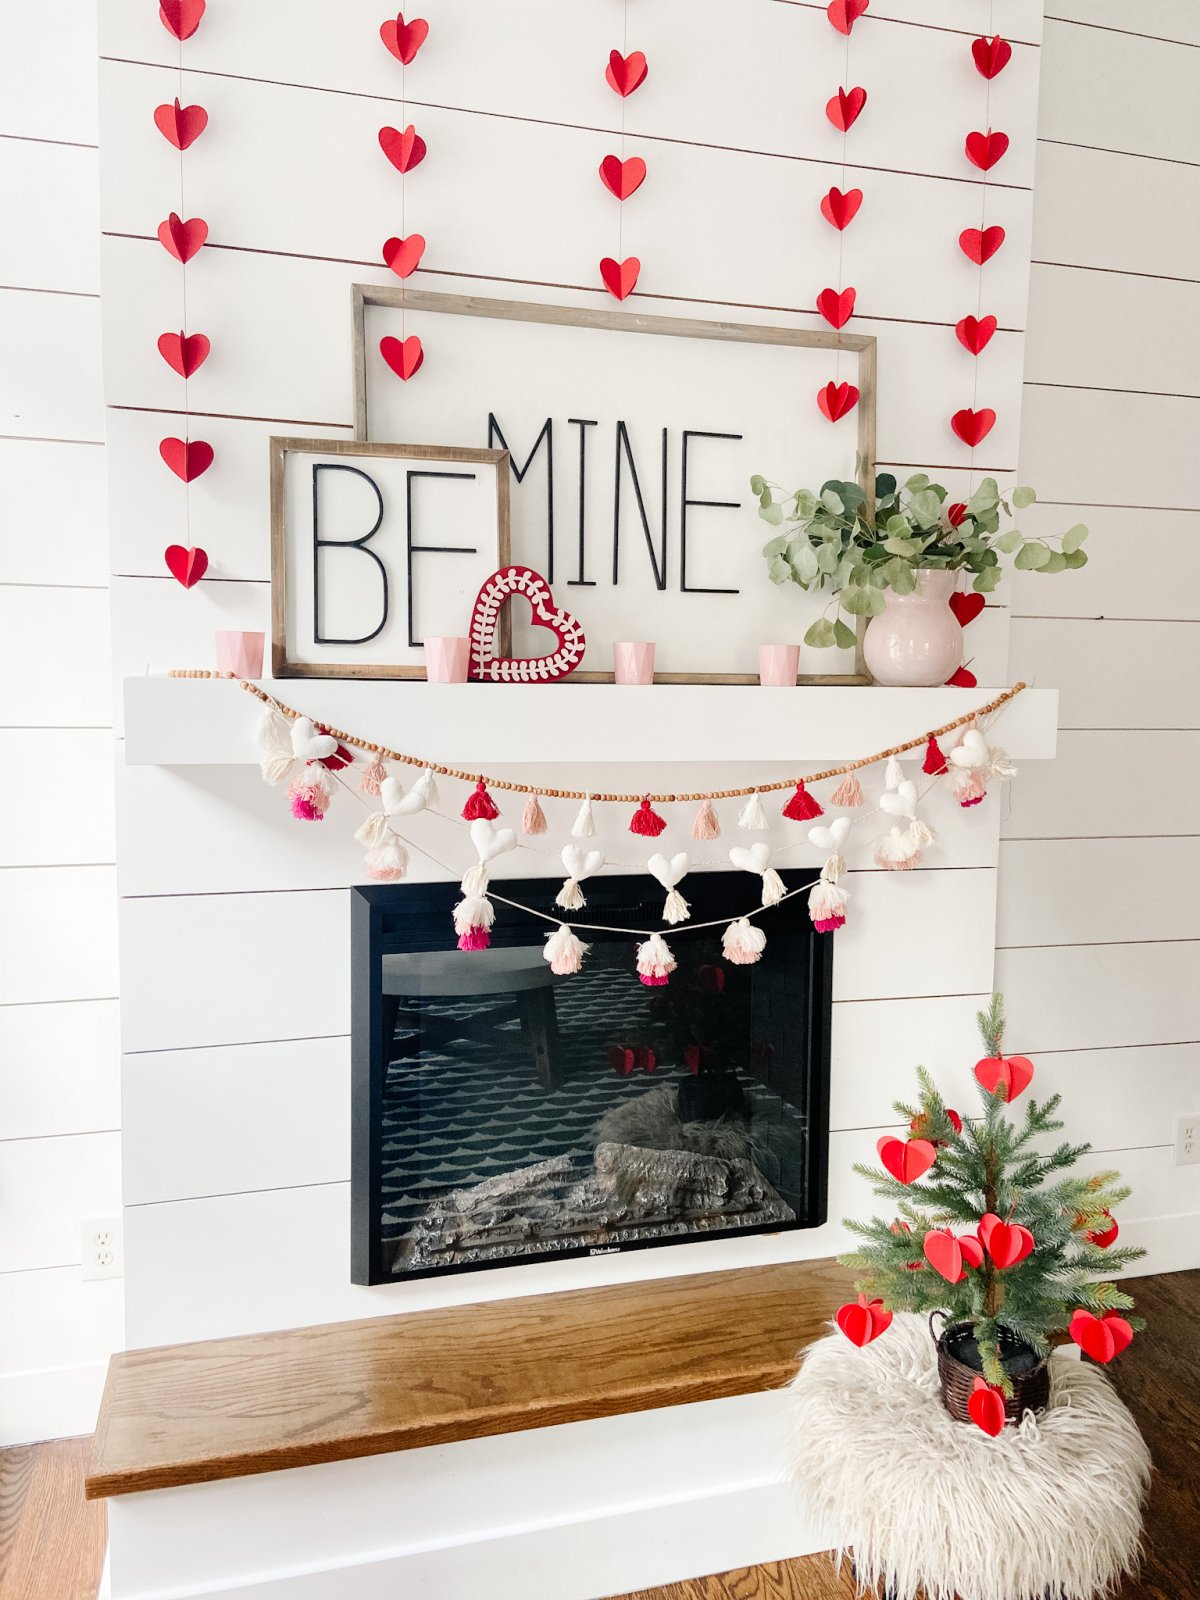 Be Mine Valentine Mantel Ideas. Create some DIY Valentine's signs, hang festive banners two ways and add hearts to a tree for colorful Valentine's Day decor!